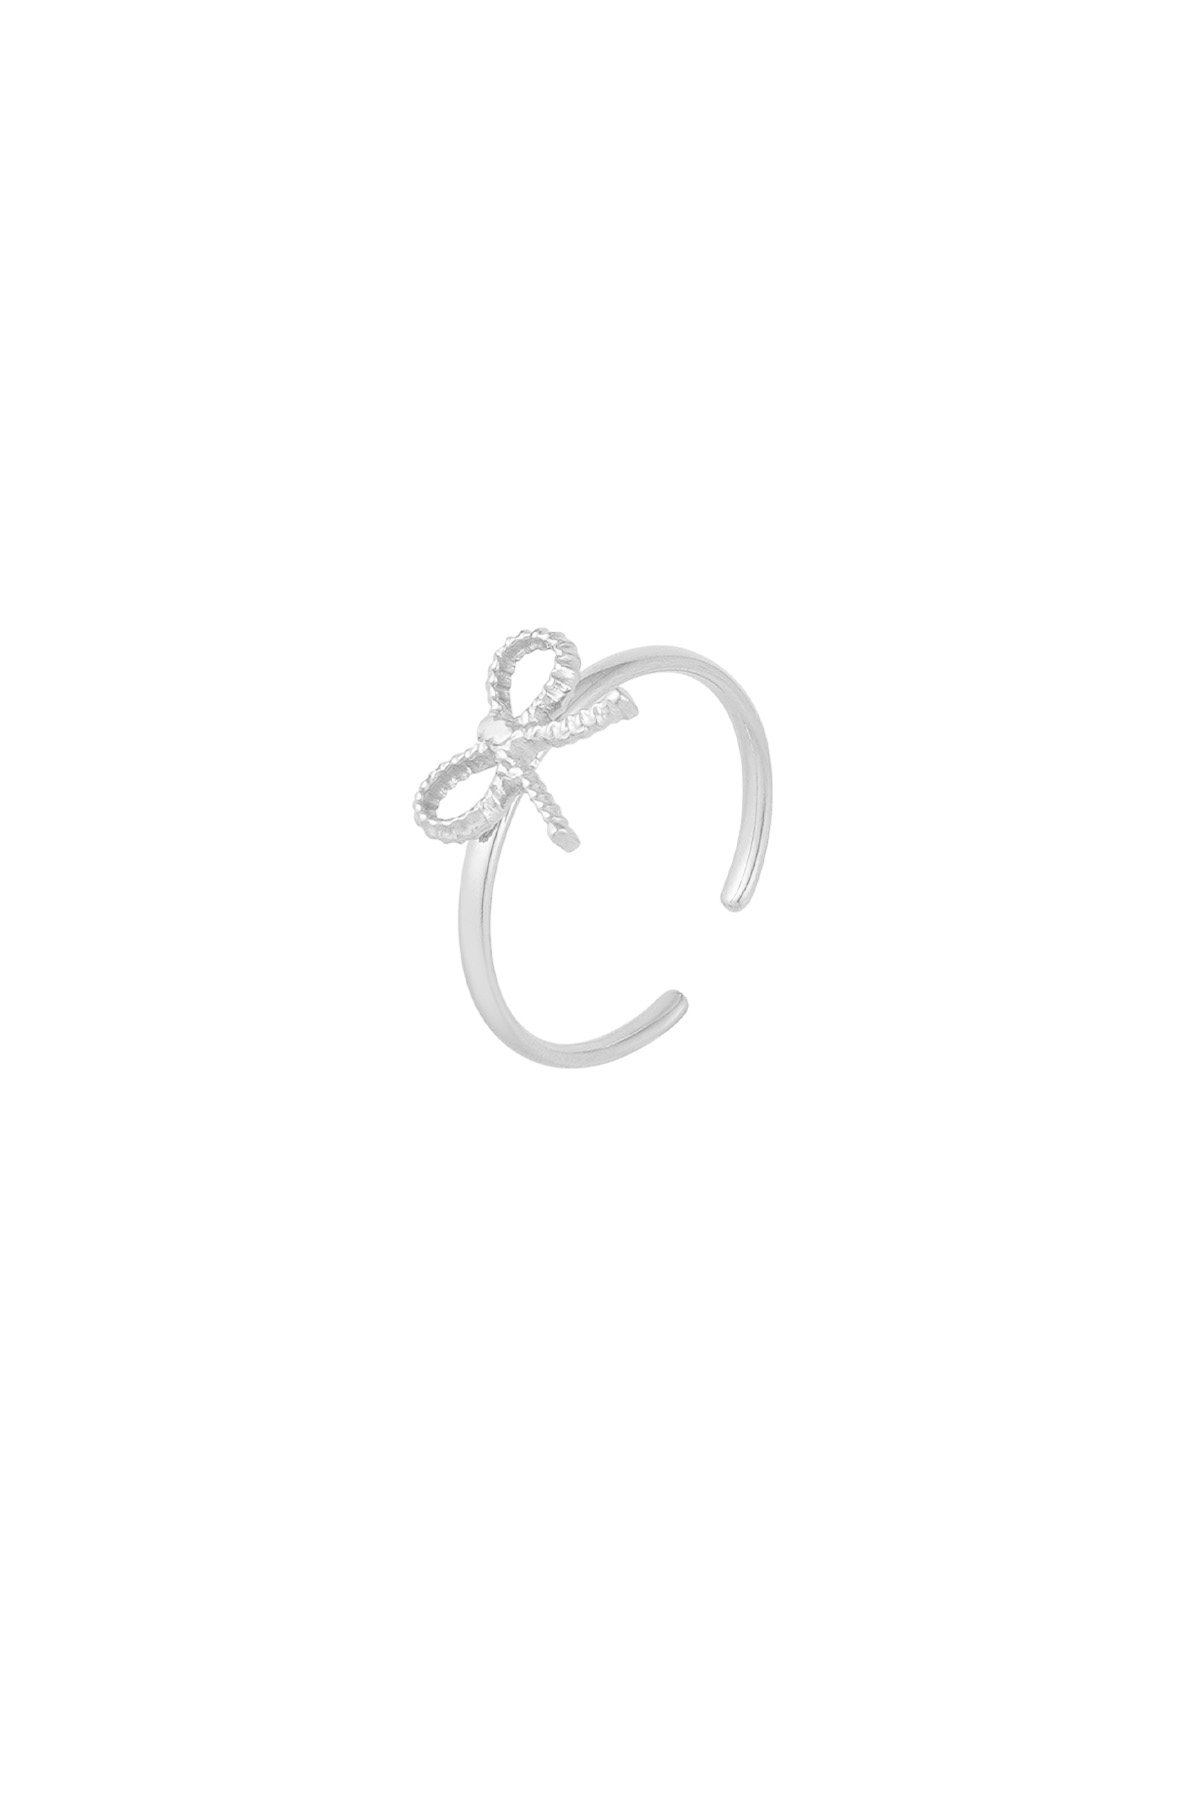 Ring bow basic - silver h5 